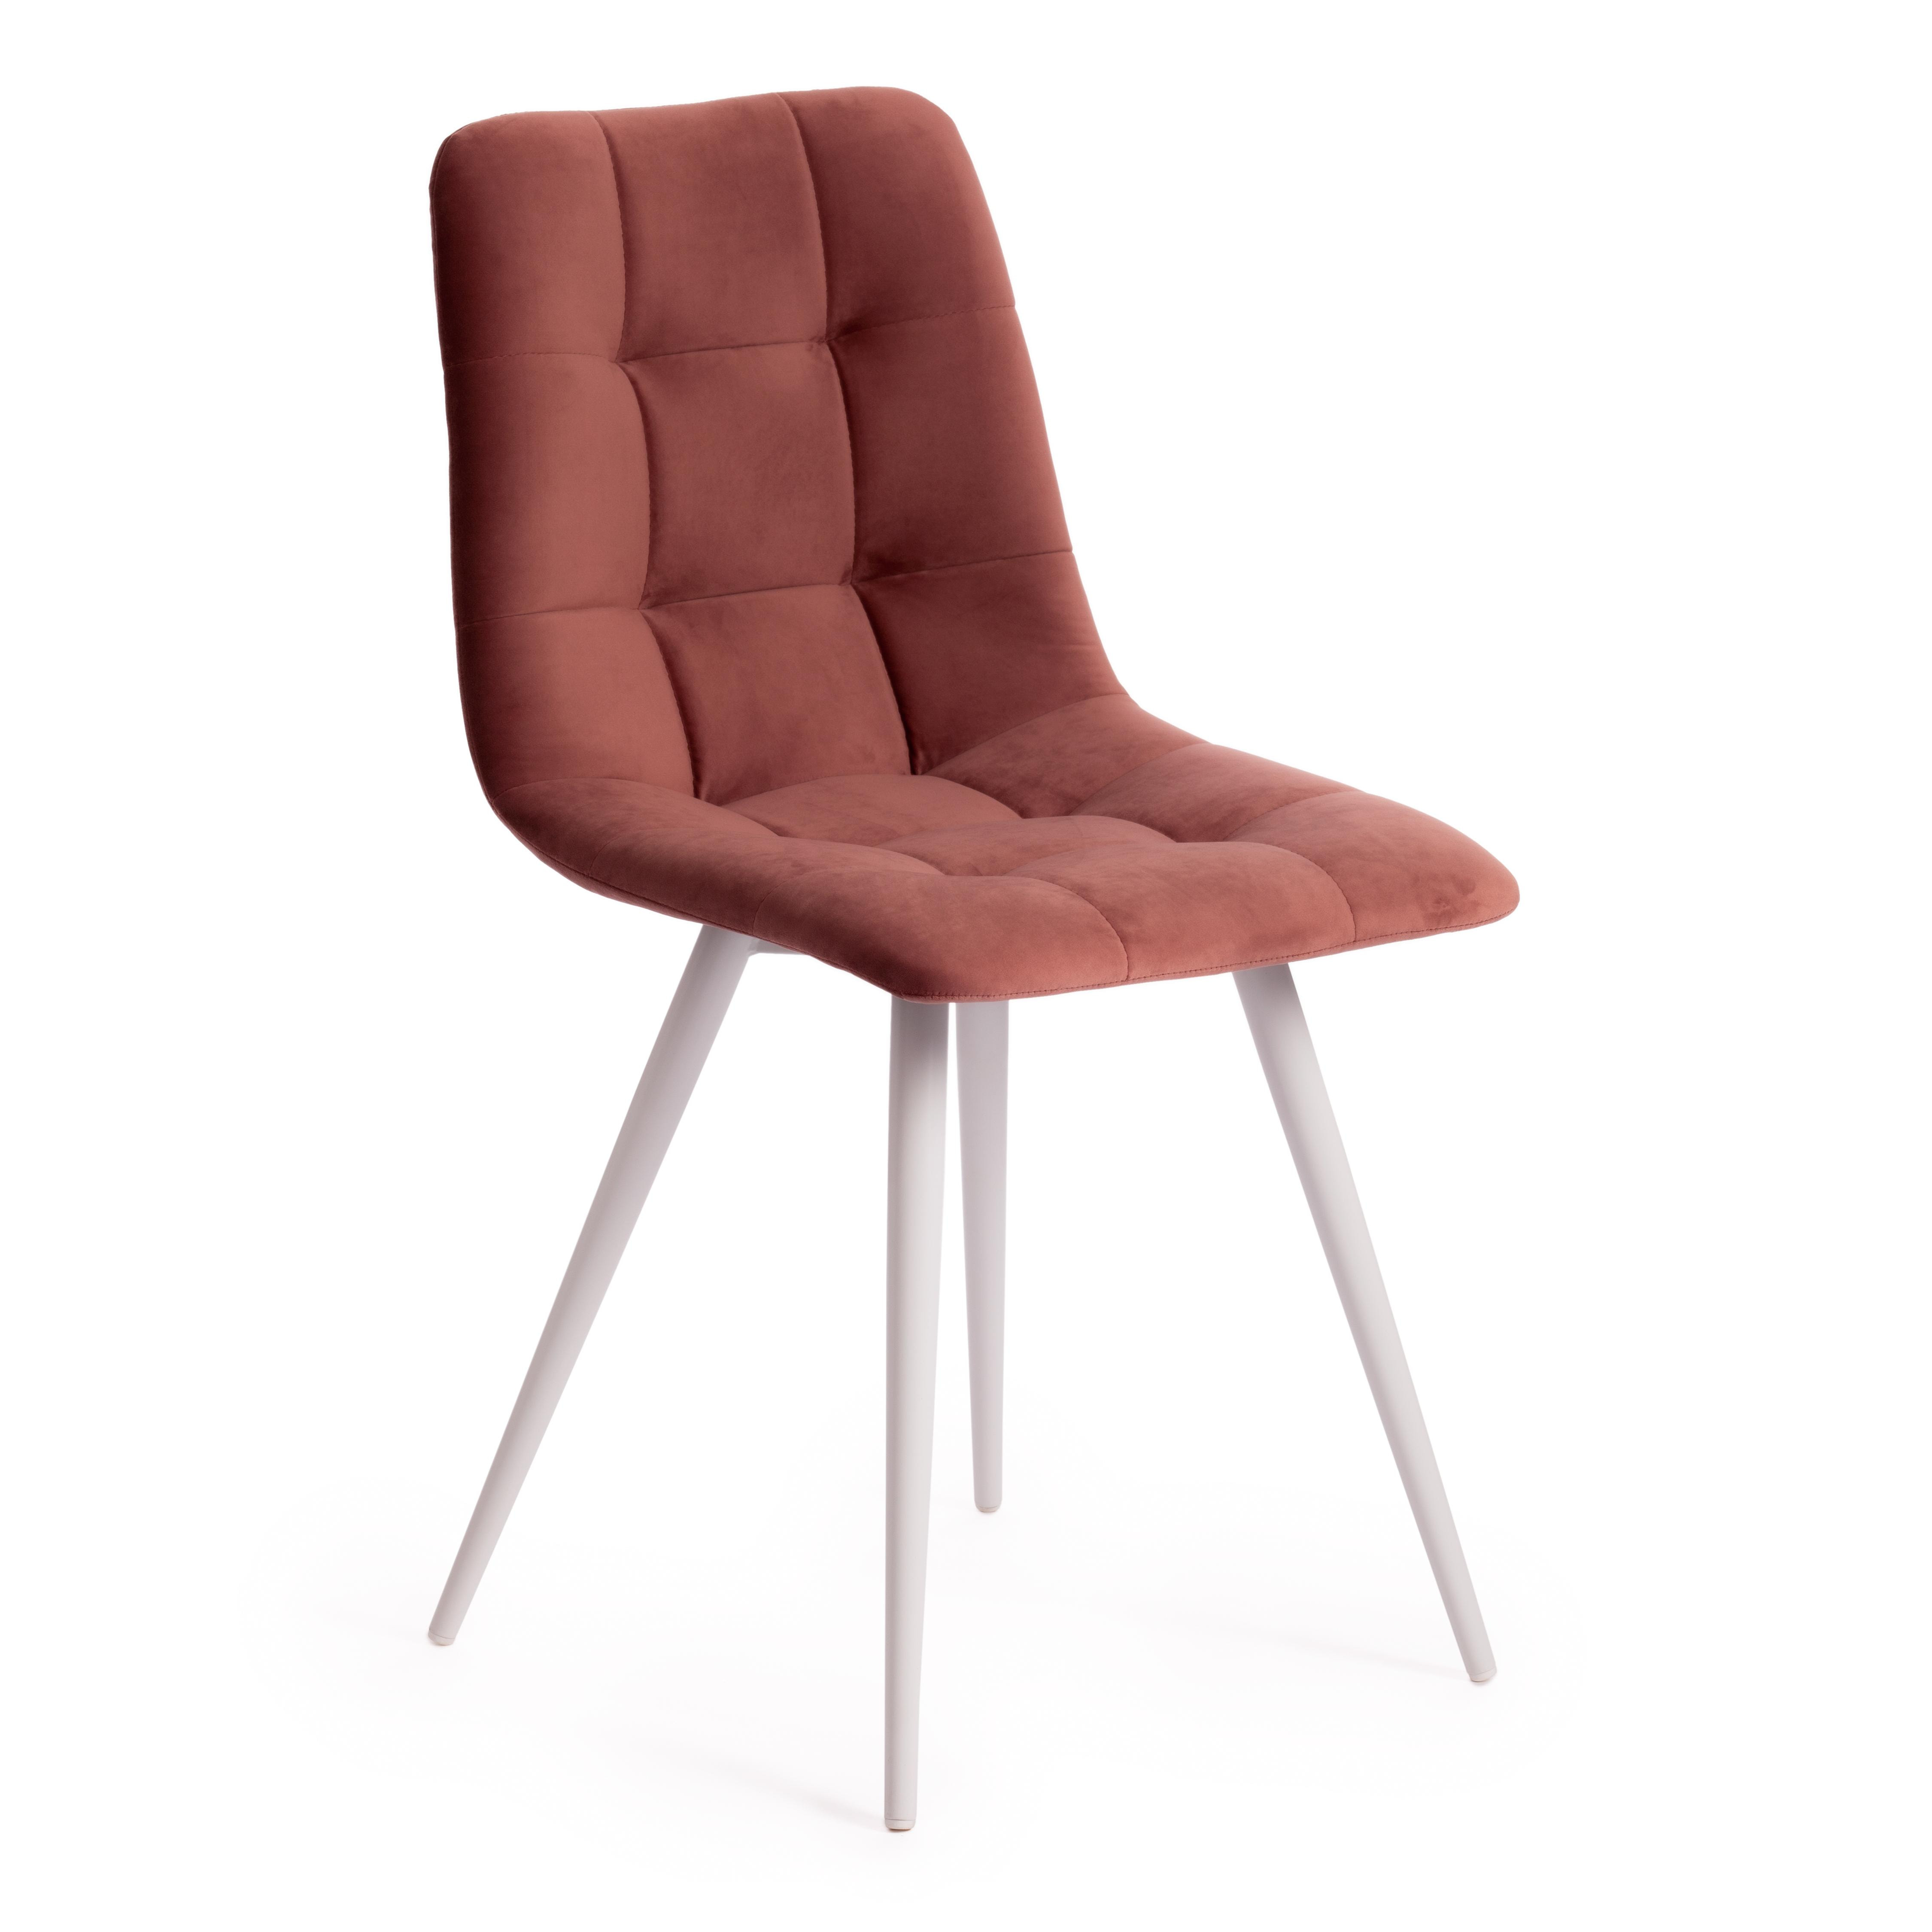 TetChair  TetChair Chilly 7095-1 coral barkhat,  